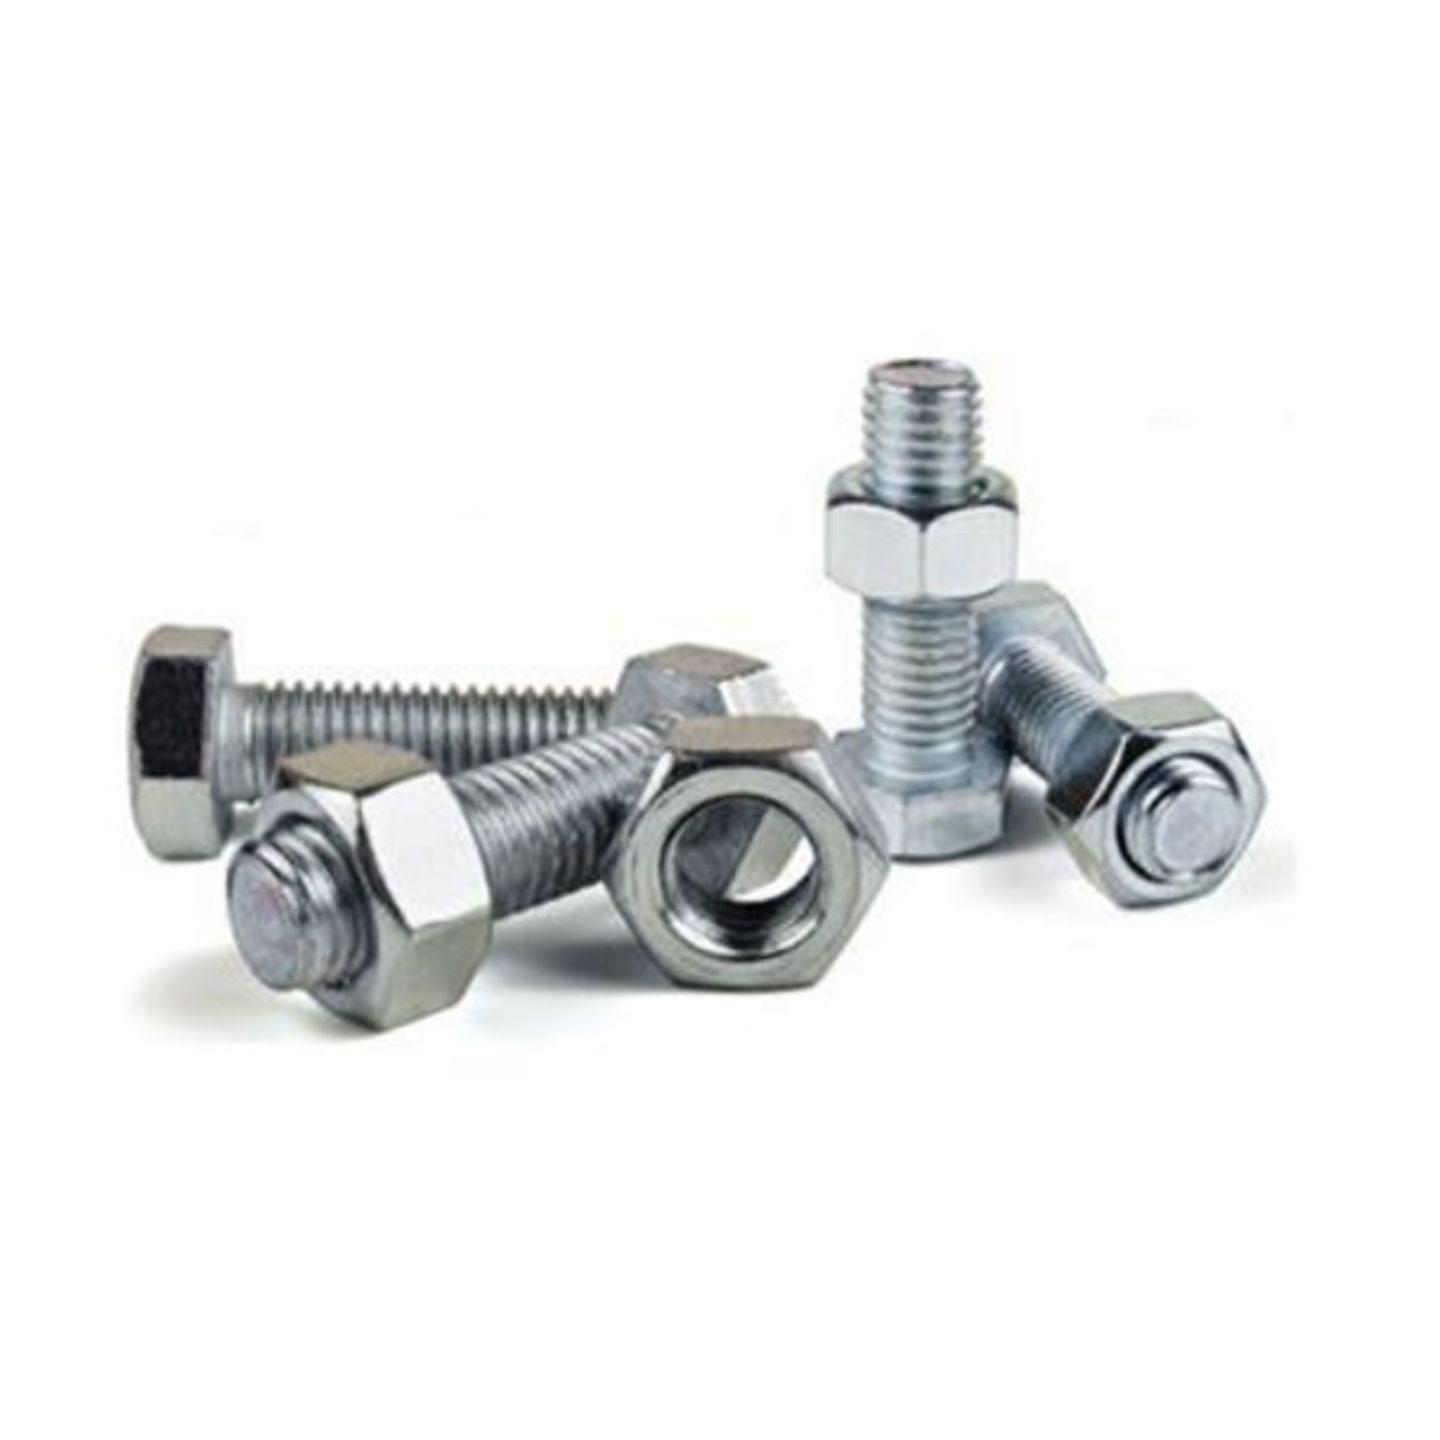 MOST SIZES OF BOLTS / NUTS & WASHERS G4.8 / G8.8 / G10.9 Etc...